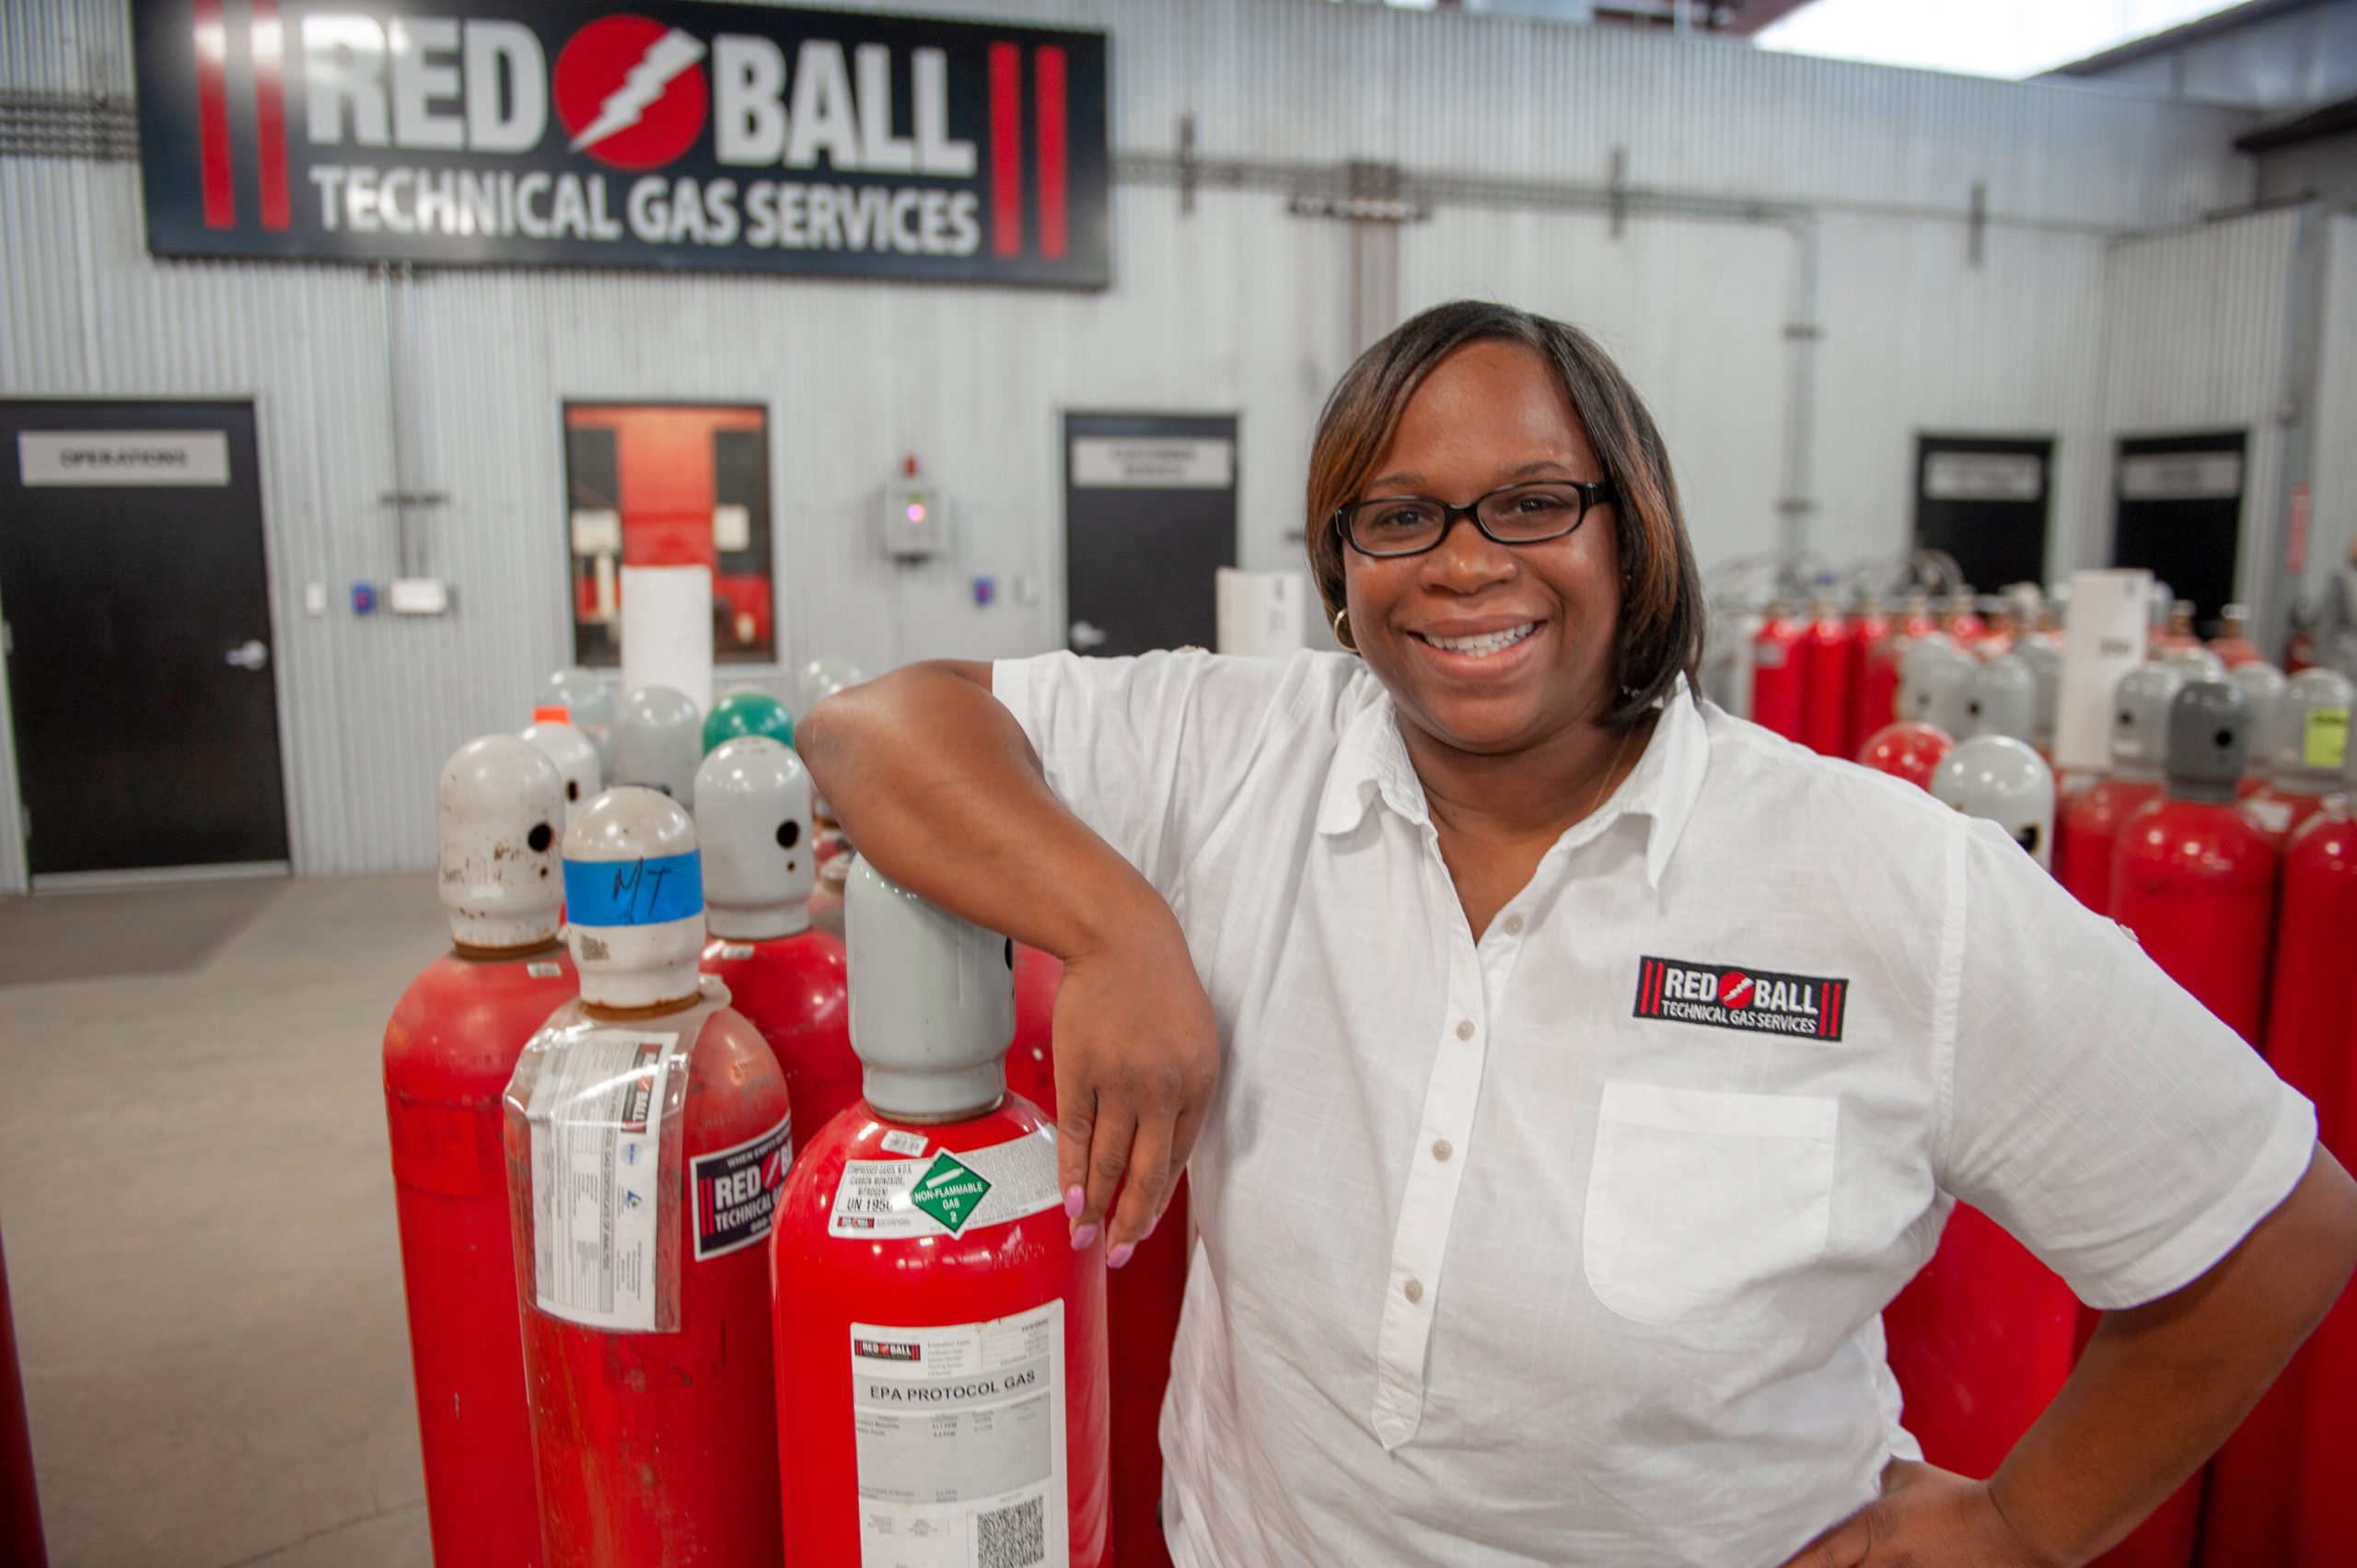 Red Ball Technical Gas Services Operations Manager at TGS Shreveport